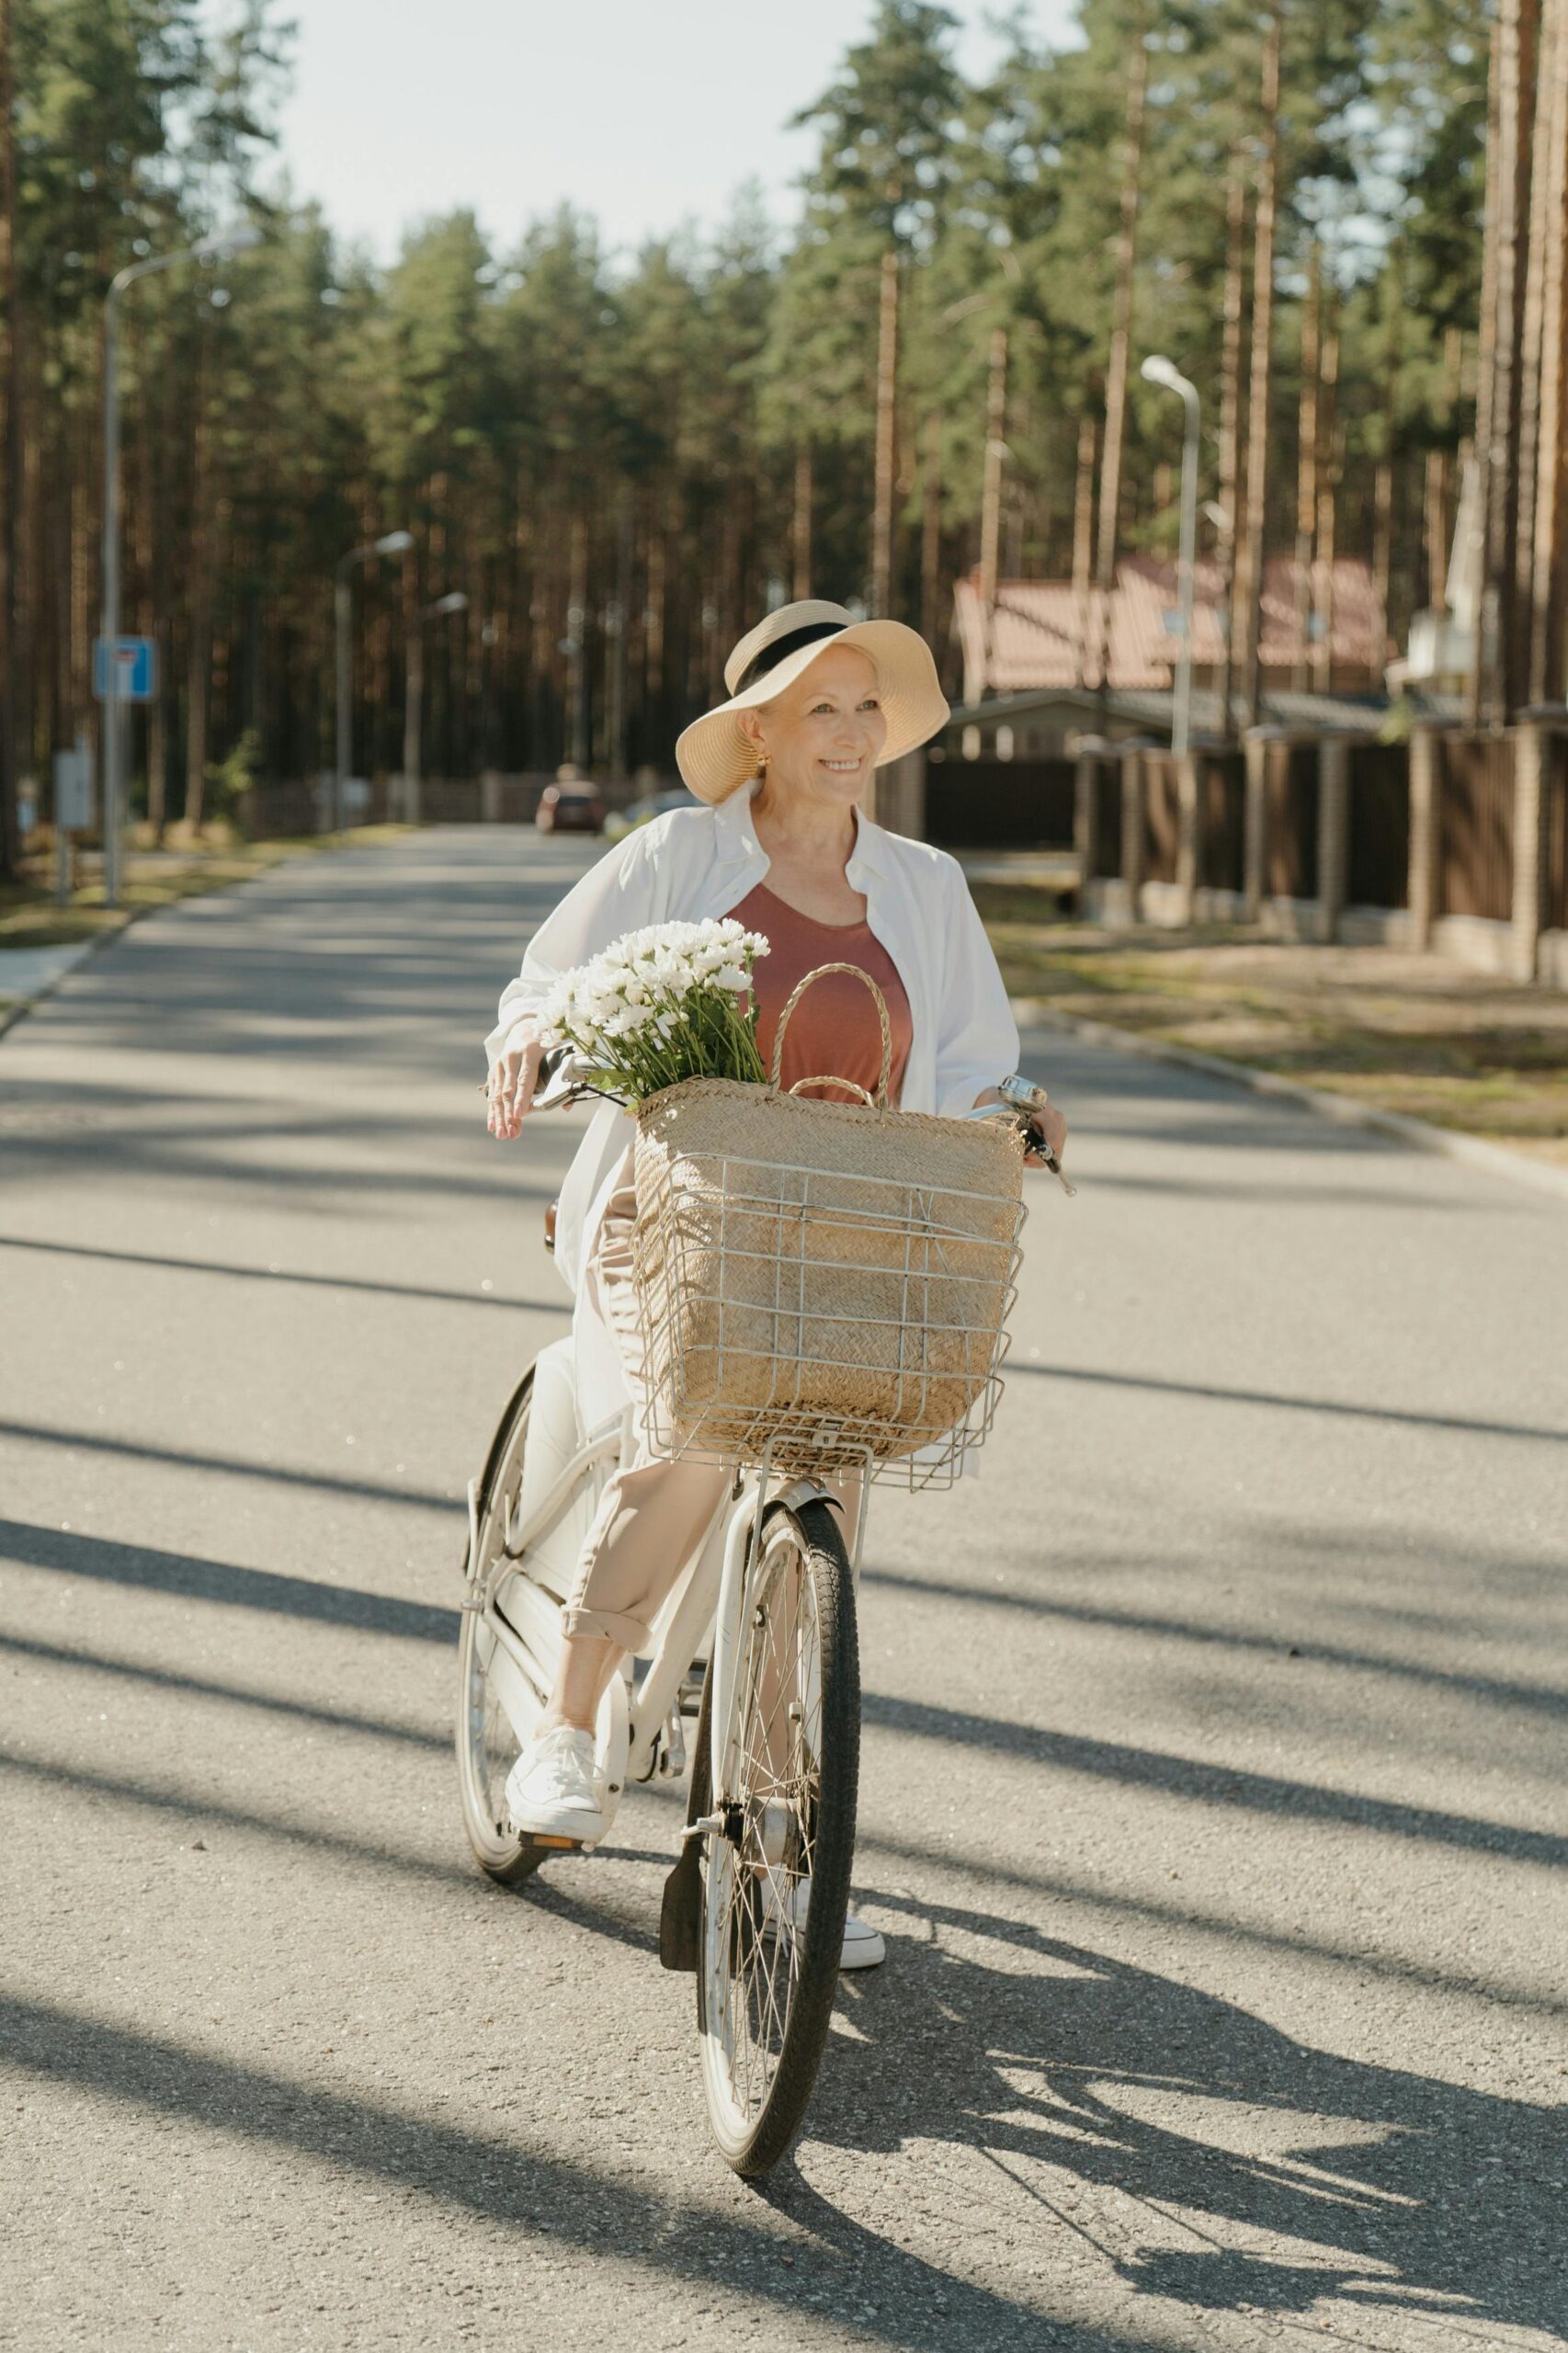 7 Reasons Why E-Biking is the Perfect Activity for People Over 50